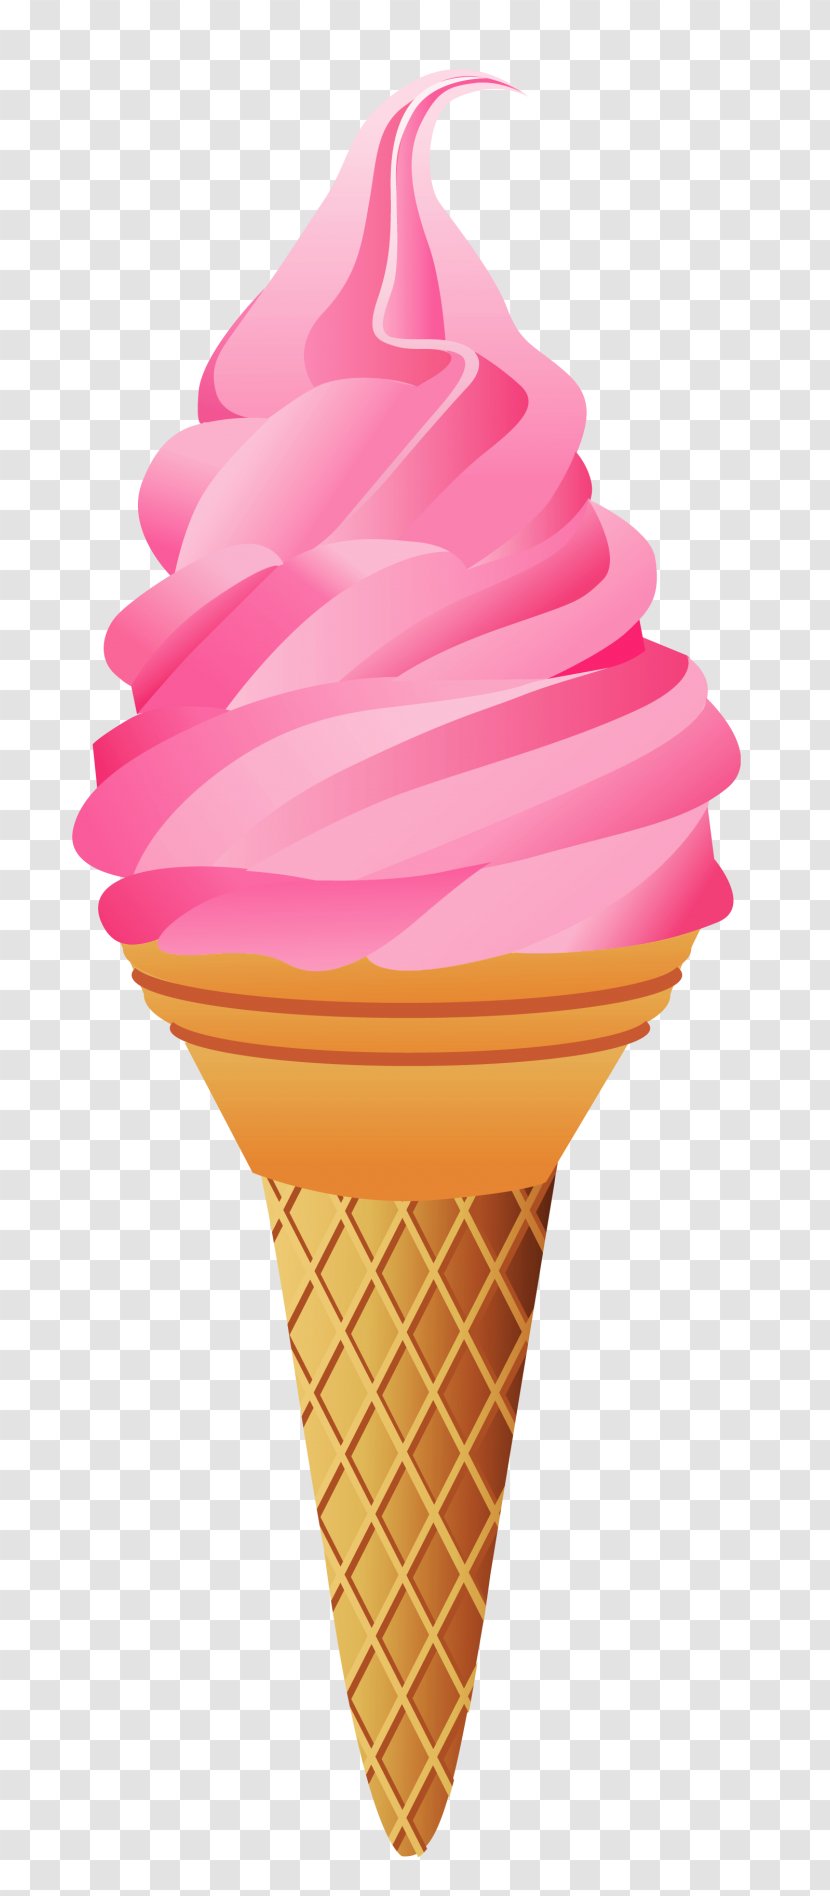 Ice Cream Cones Sundae Strawberry Chocolate - Frosting Icing Transparent PNG